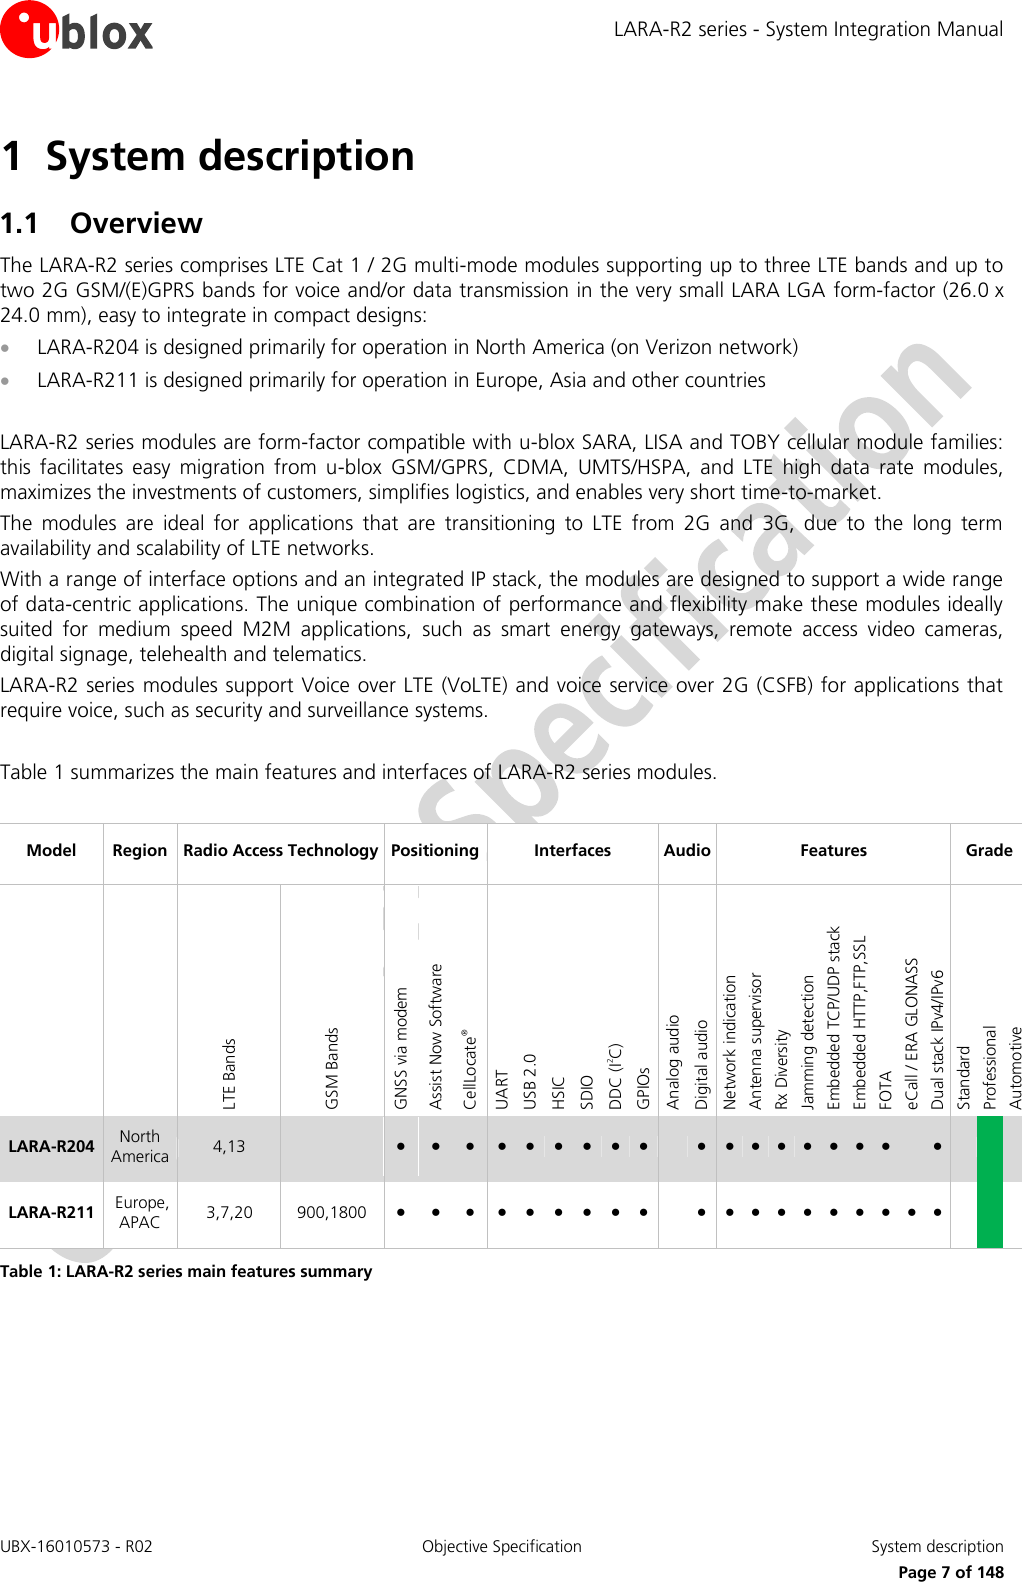 LARA-R2 series - System Integration Manual UBX-16010573 - R02  Objective Specification  System description     Page 7 of 148 1 System description 1.1 Overview The LARA-R2 series comprises LTE Cat 1 / 2G multi-mode modules supporting up to three LTE bands and up to two 2G GSM/(E)GPRS bands for voice and/or data transmission in the very small LARA LGA  form-factor (26.0 x 24.0 mm), easy to integrate in compact designs:  LARA-R204 is designed primarily for operation in North America (on Verizon network)  LARA-R211 is designed primarily for operation in Europe, Asia and other countries  LARA-R2 series modules are form-factor compatible with u-blox SARA, LISA and TOBY cellular module families: this  facilitates  easy  migration  from  u-blox  GSM/GPRS,  CDMA,  UMTS/HSPA,  and  LTE  high  data  rate  modules, maximizes the investments of customers, simplifies logistics, and enables very short time-to-market. The  modules  are  ideal  for  applications  that  are  transitioning  to  LTE  from  2G  and  3G,  due  to  the  long  term availability and scalability of LTE networks. With a range of interface options and an integrated IP stack, the modules are designed to support a wide range of data-centric applications. The unique combination of performance and flexibility make these modules ideally suited  for  medium  speed  M2M  applications,  such  as  smart  energy  gateways,  remote  access  video  cameras, digital signage, telehealth and telematics. LARA-R2 series modules support Voice over LTE (VoLTE) and voice service over 2G (CSFB) for applications that require voice, such as security and surveillance systems.  Table 1 summarizes the main features and interfaces of LARA-R2 series modules.  Model Region Radio Access Technology Positioning Interfaces Audio Features Grade   LTE Bands GSM Bands GNSS via modem Assist Now Software CellLocate® UART USB 2.0 HSIC SDIO  DDC (I2C) GPIOs Analog audio Digital audio  Network indication Antenna supervisor Rx Diversity Jamming detection Embedded TCP/UDP stack Embedded HTTP,FTP,SSL FOTA eCall / ERA GLONASS Dual stack IPv4/IPv6 Standard Professional Automotive LARA-R204 North America 4,13  ● ● ● ● ● ● ● ● ●  ● ● ● ● ● ● ● ●  ●    LARA-R211  Europe, APAC 3,7,20 900,1800 ● ● ● ● ● ● ● ● ●  ● ● ● ● ● ● ● ● ● ●    Table 1: LARA-R2 series main features summary   